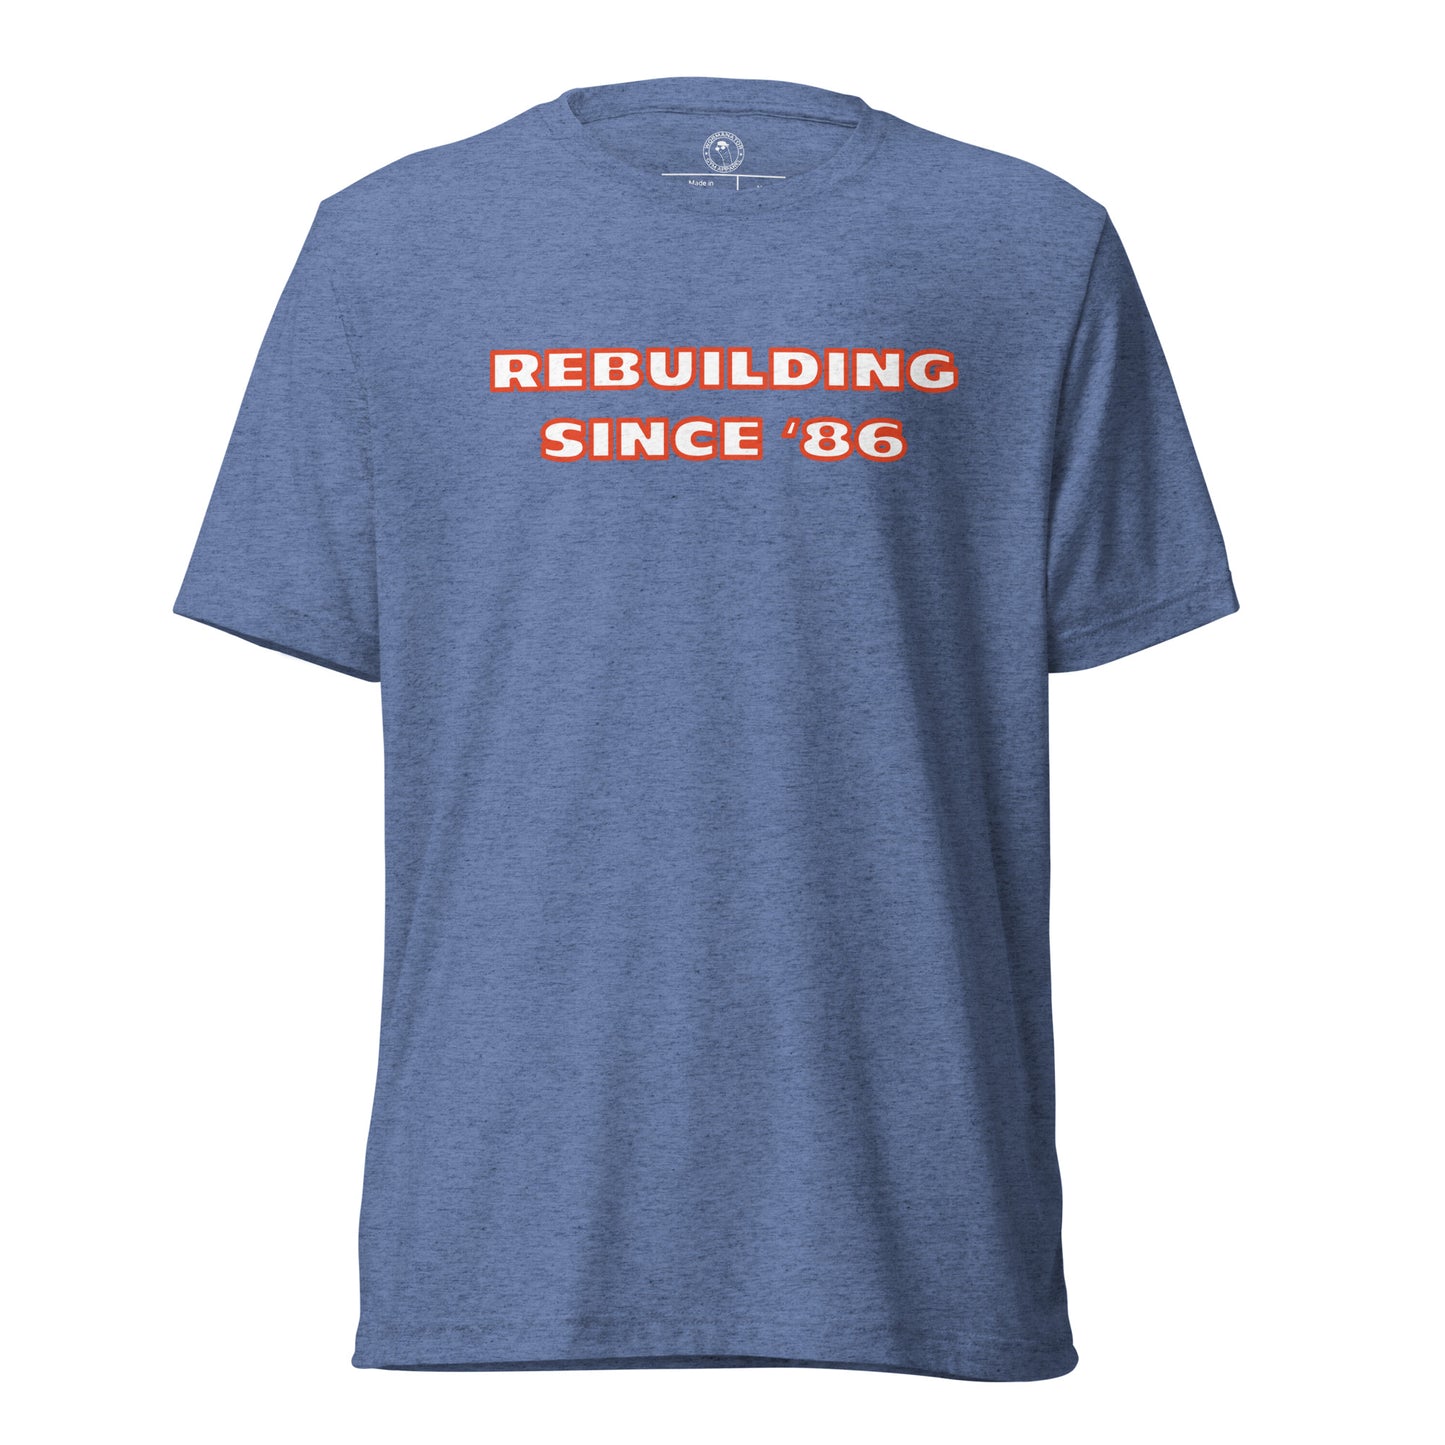 Chicago Bears Rebuilding Since 1986 Shirt in Blue Triblend